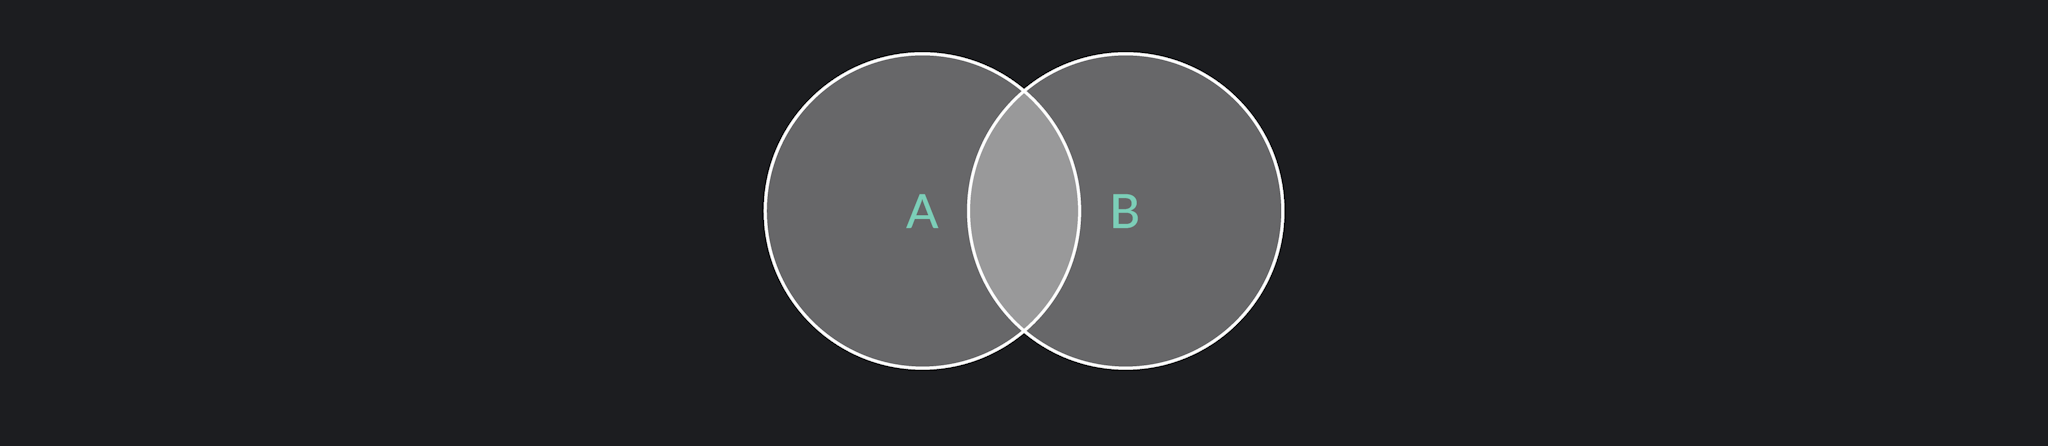 union of two sets in a venn diagram